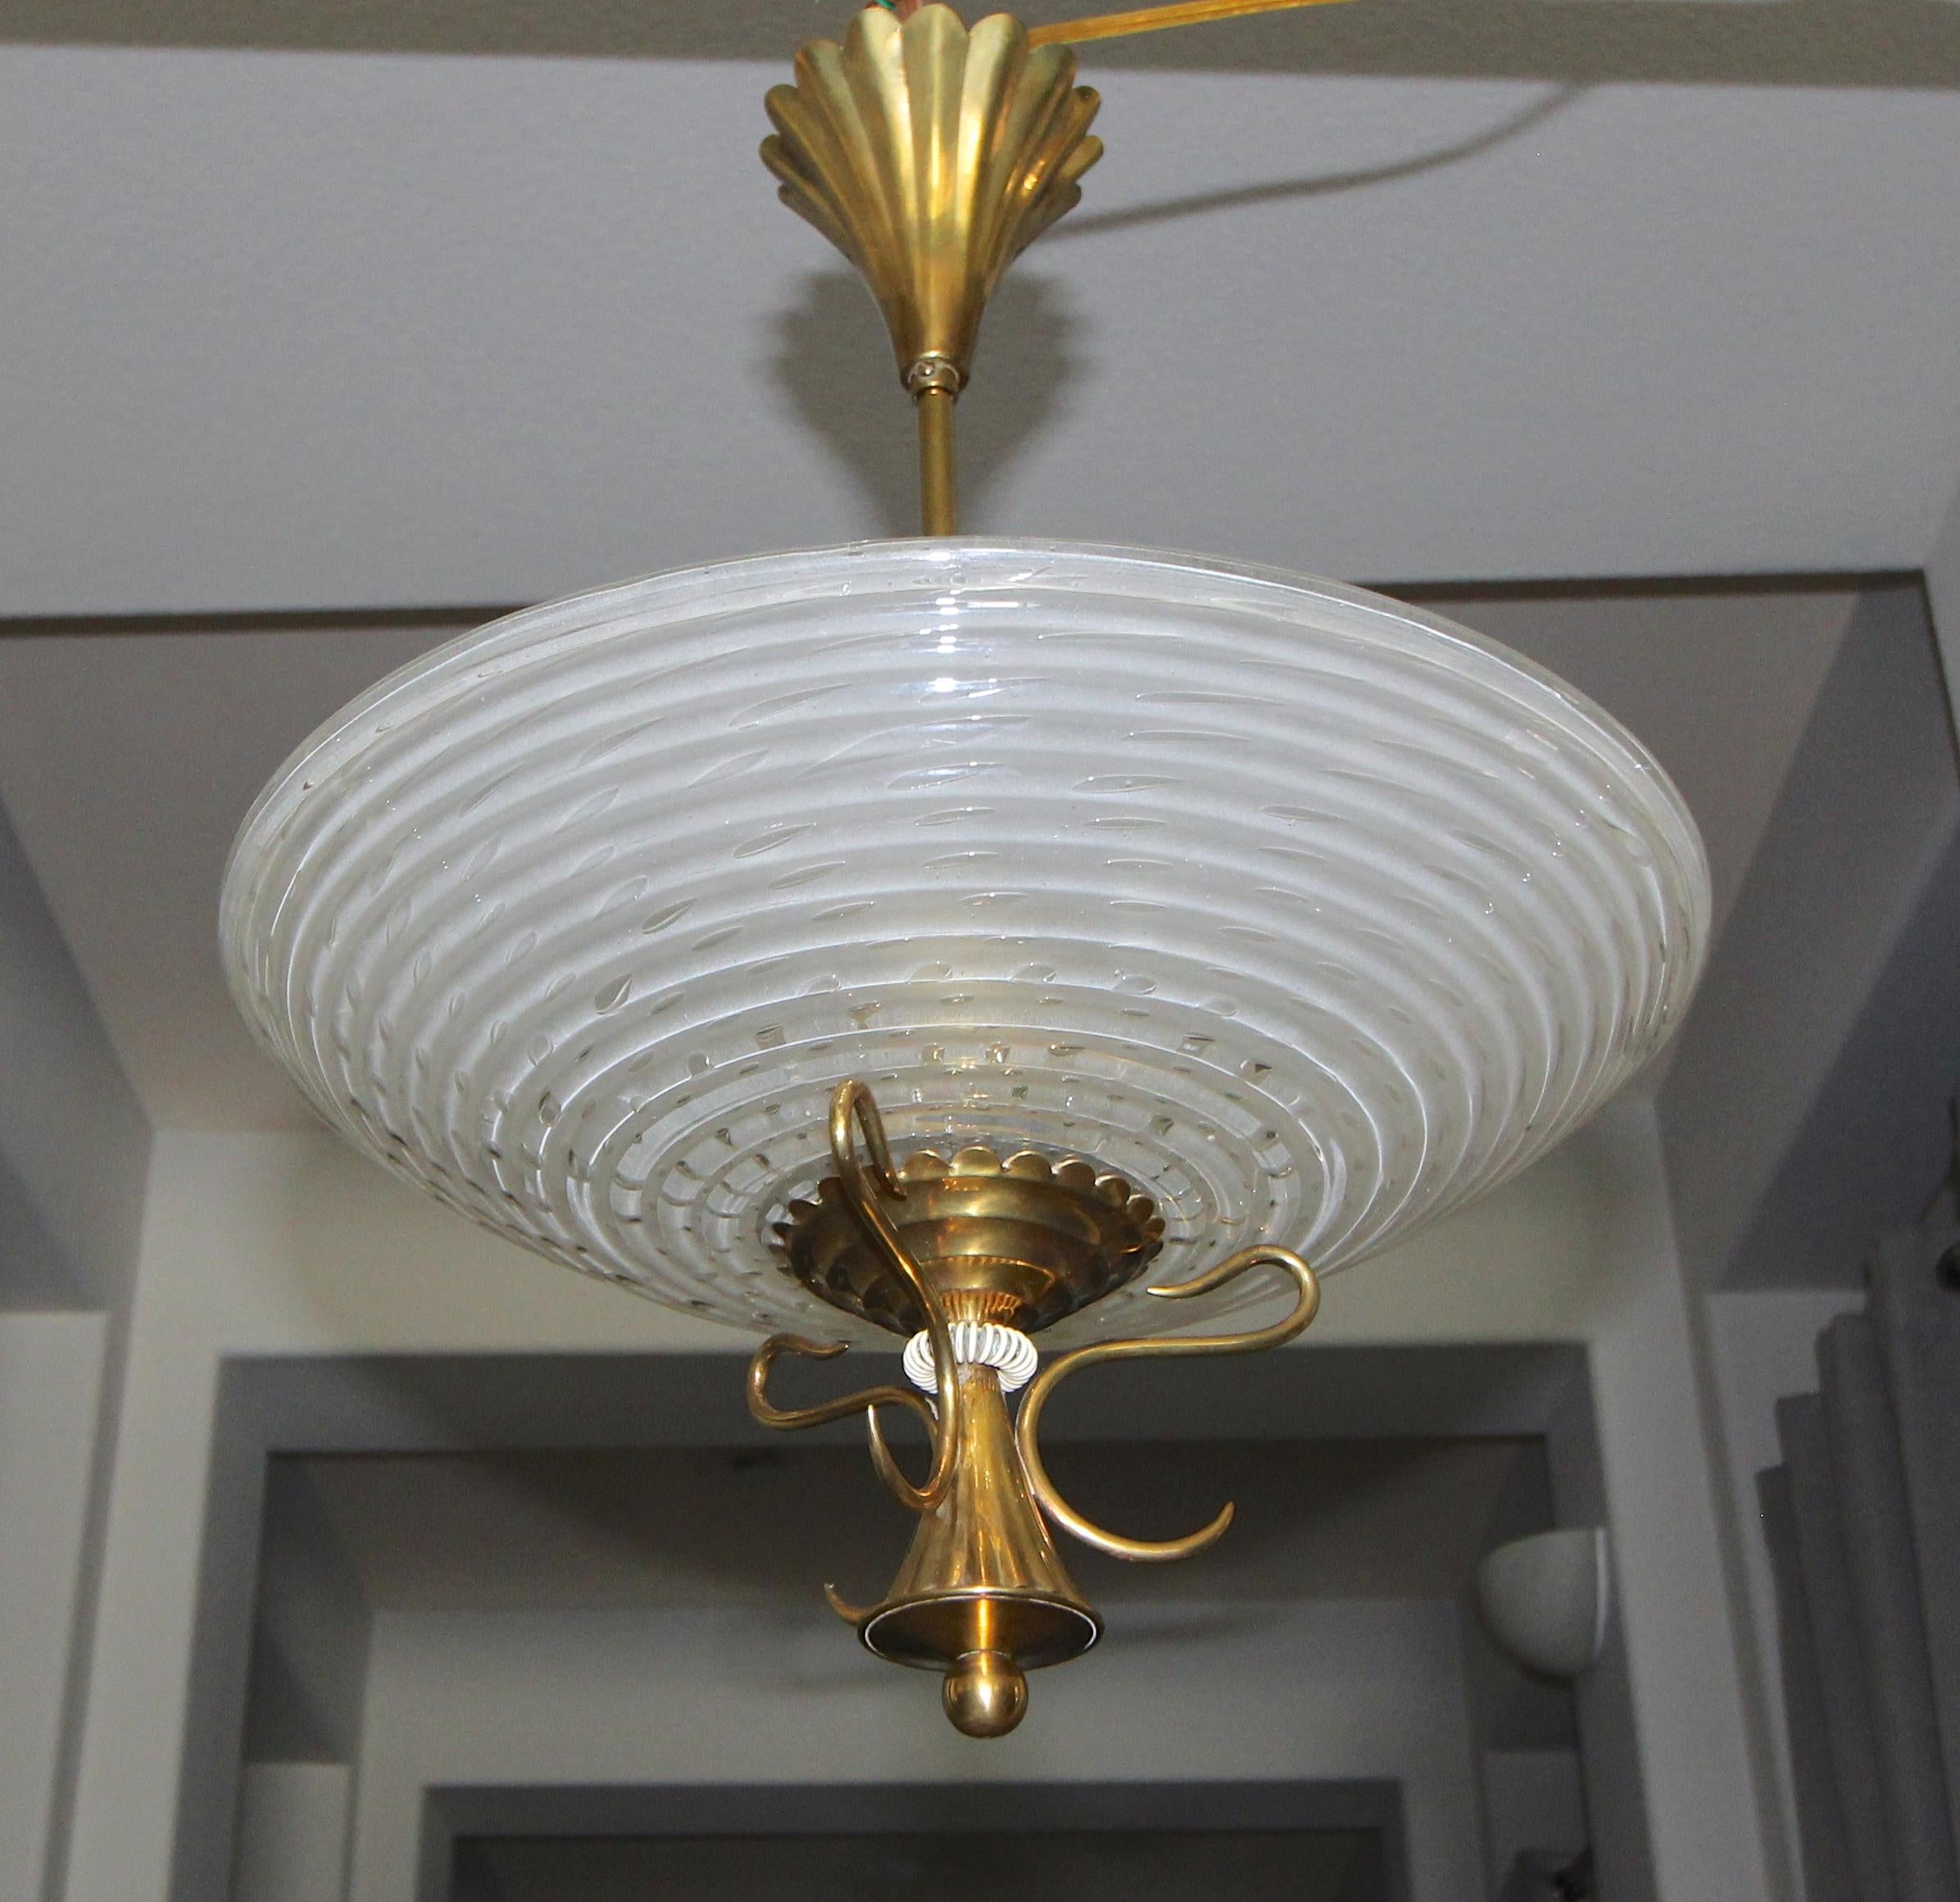 Italian Barovier pendant light with bowl form Murano glass ribbed shade with control bubbles and acid etched back to diffuse light. Glass is suspended on distinctive moderne brass frame and fittings. Fixture uses 2 candelabra base bulbs, newly